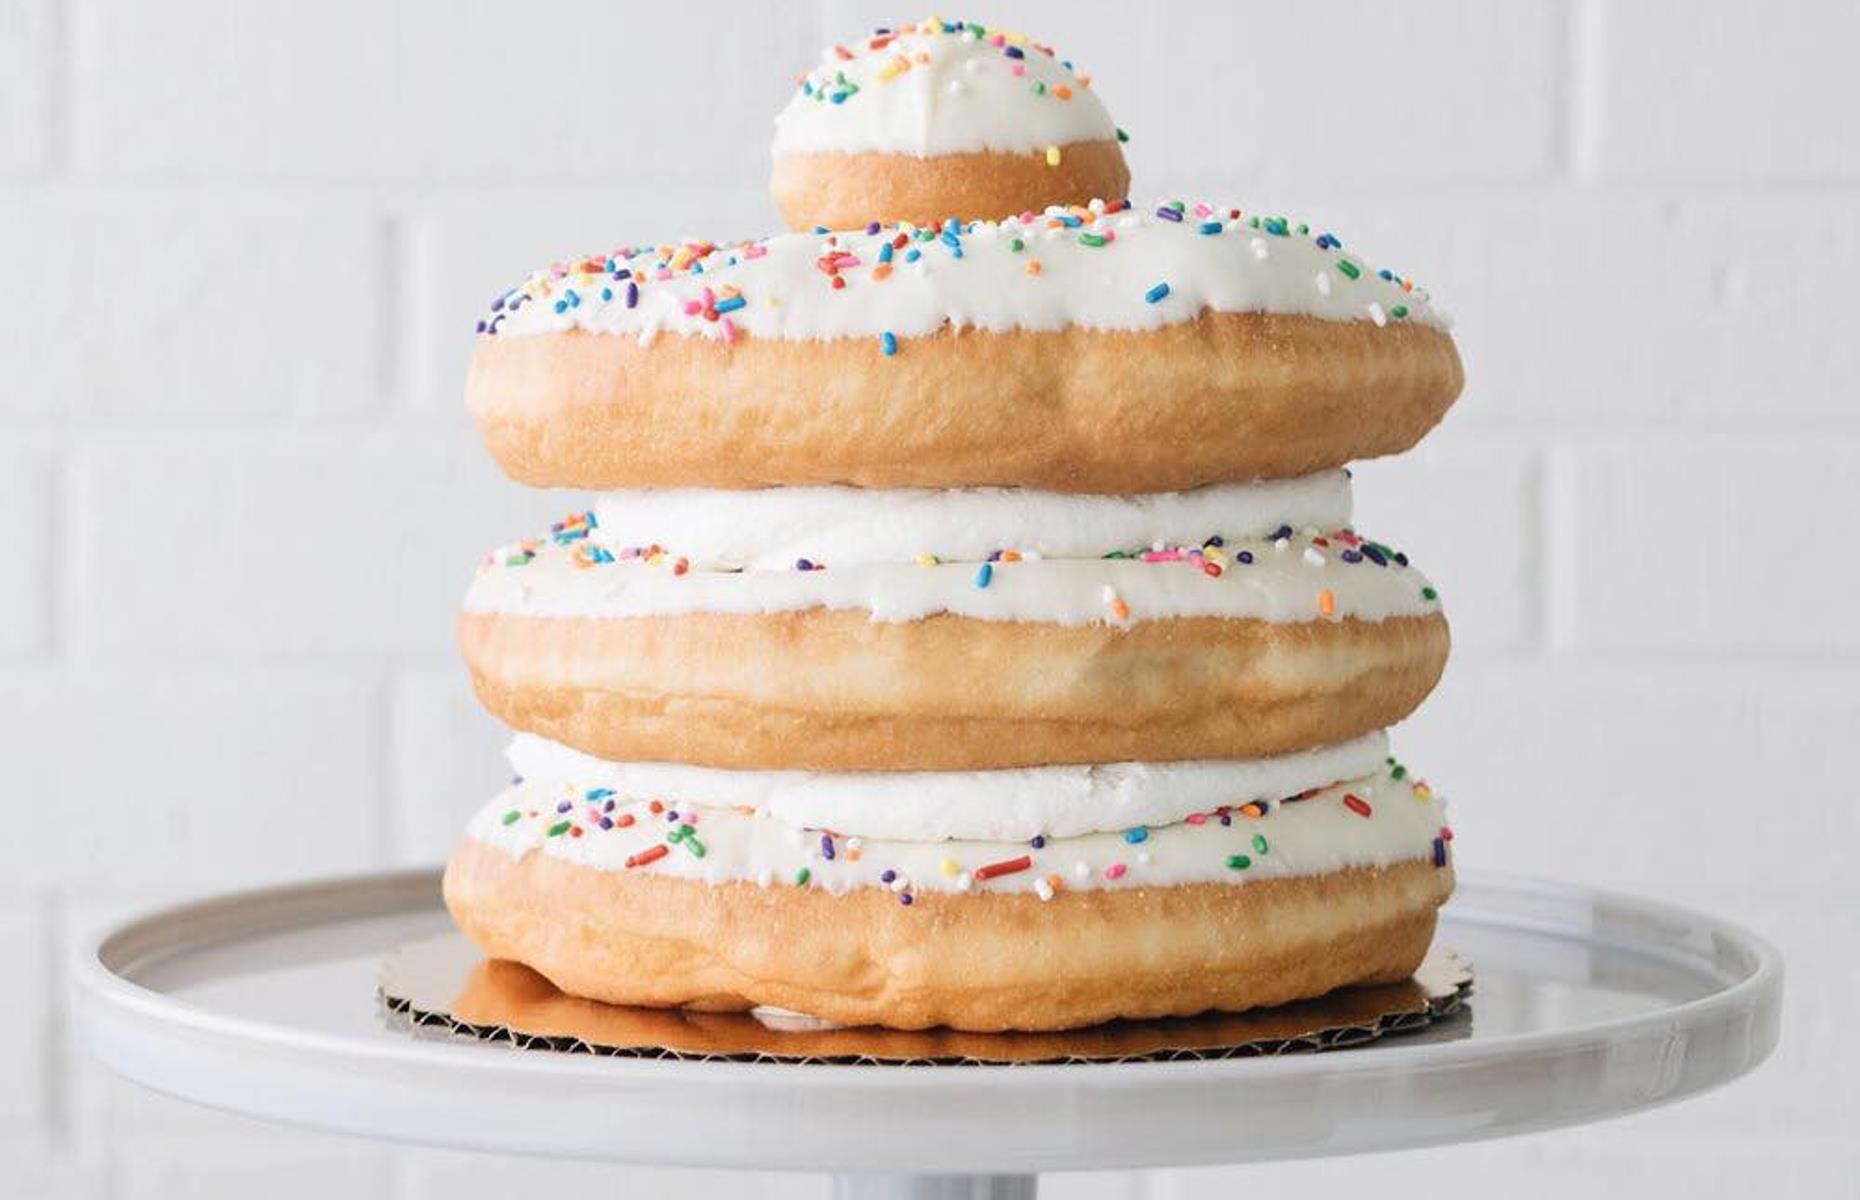 <p><span><a href="http://www.suarezbakery.com/">Suárez Bakery</a></span>, which has two locations in Charlotte, has become locally famous for its adorable (and very crave-able) donuts. The ultimate thing to order here is the Texas Doughnut Cake, a tower of the bakery’s signature donuts layered with cream and available to pre-order with different fillings and sprinkles. It serves up to eight people so it’s ideal for a special occasion. Or if you just fancy a lot of donut.</p>